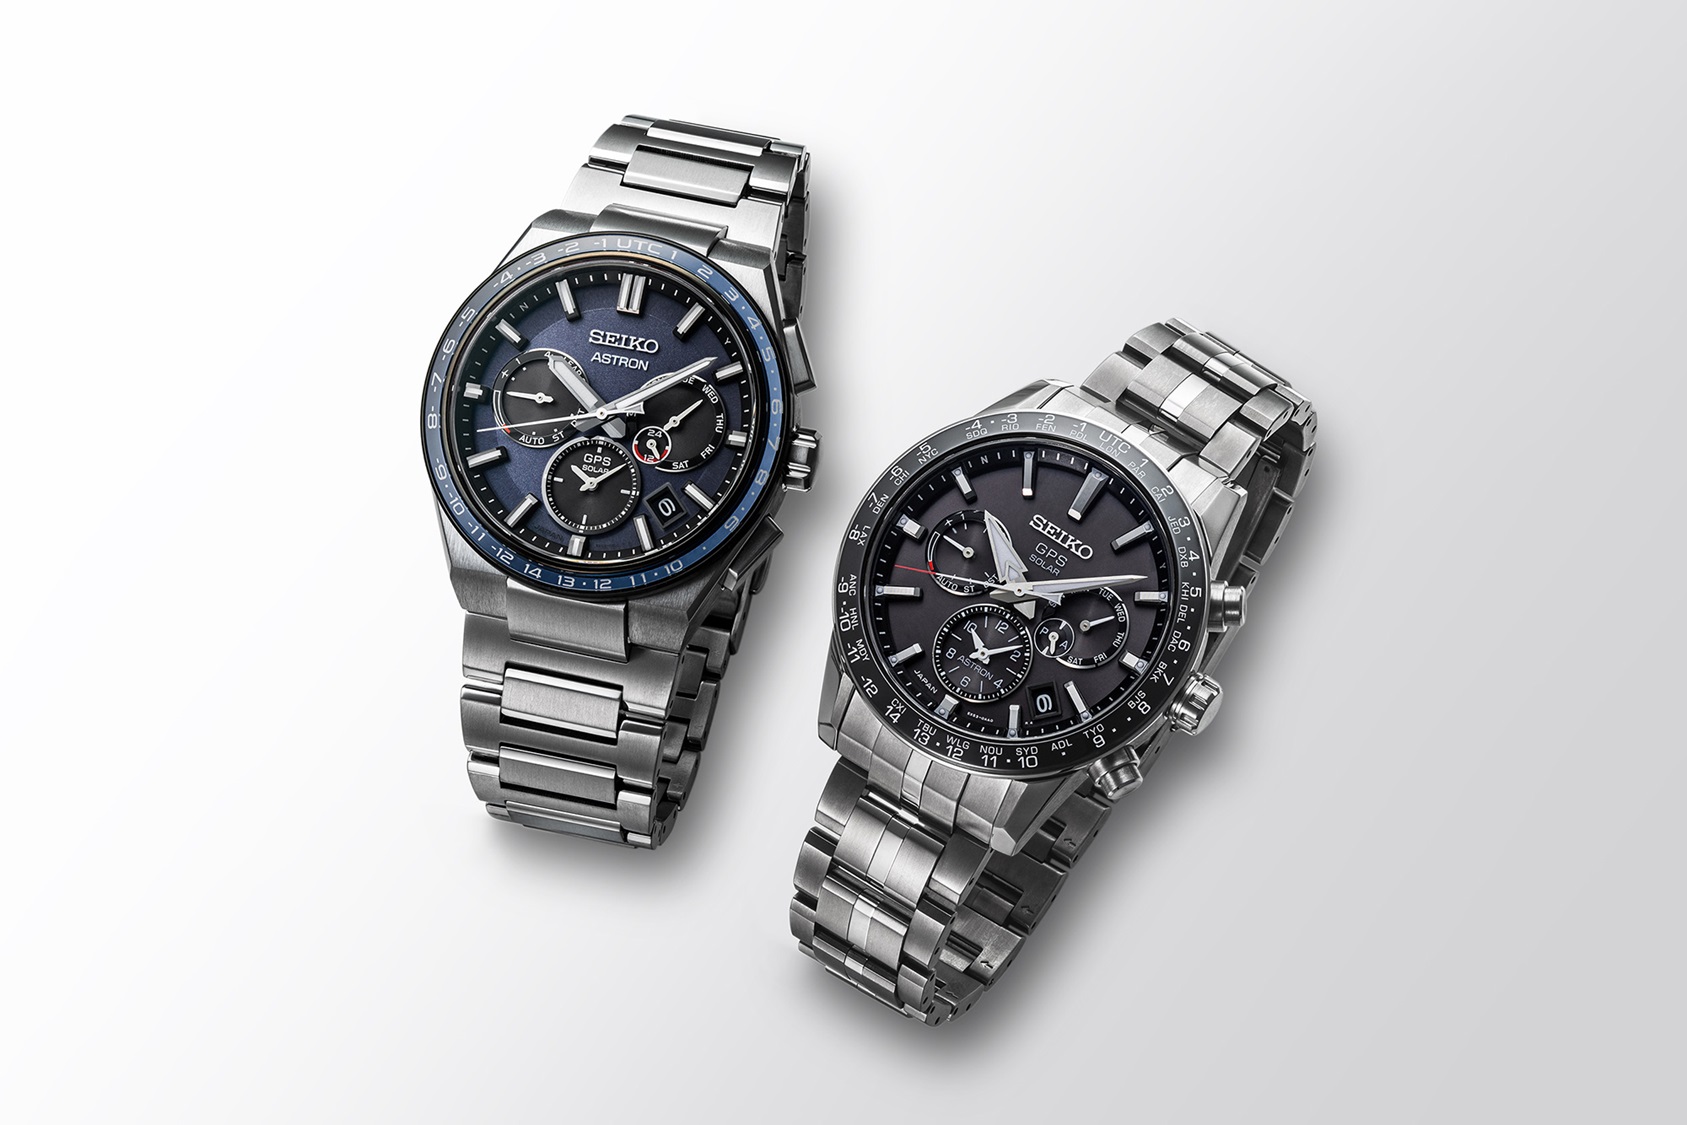 The Seiko Astron: an ongoing history of innovation and evolution